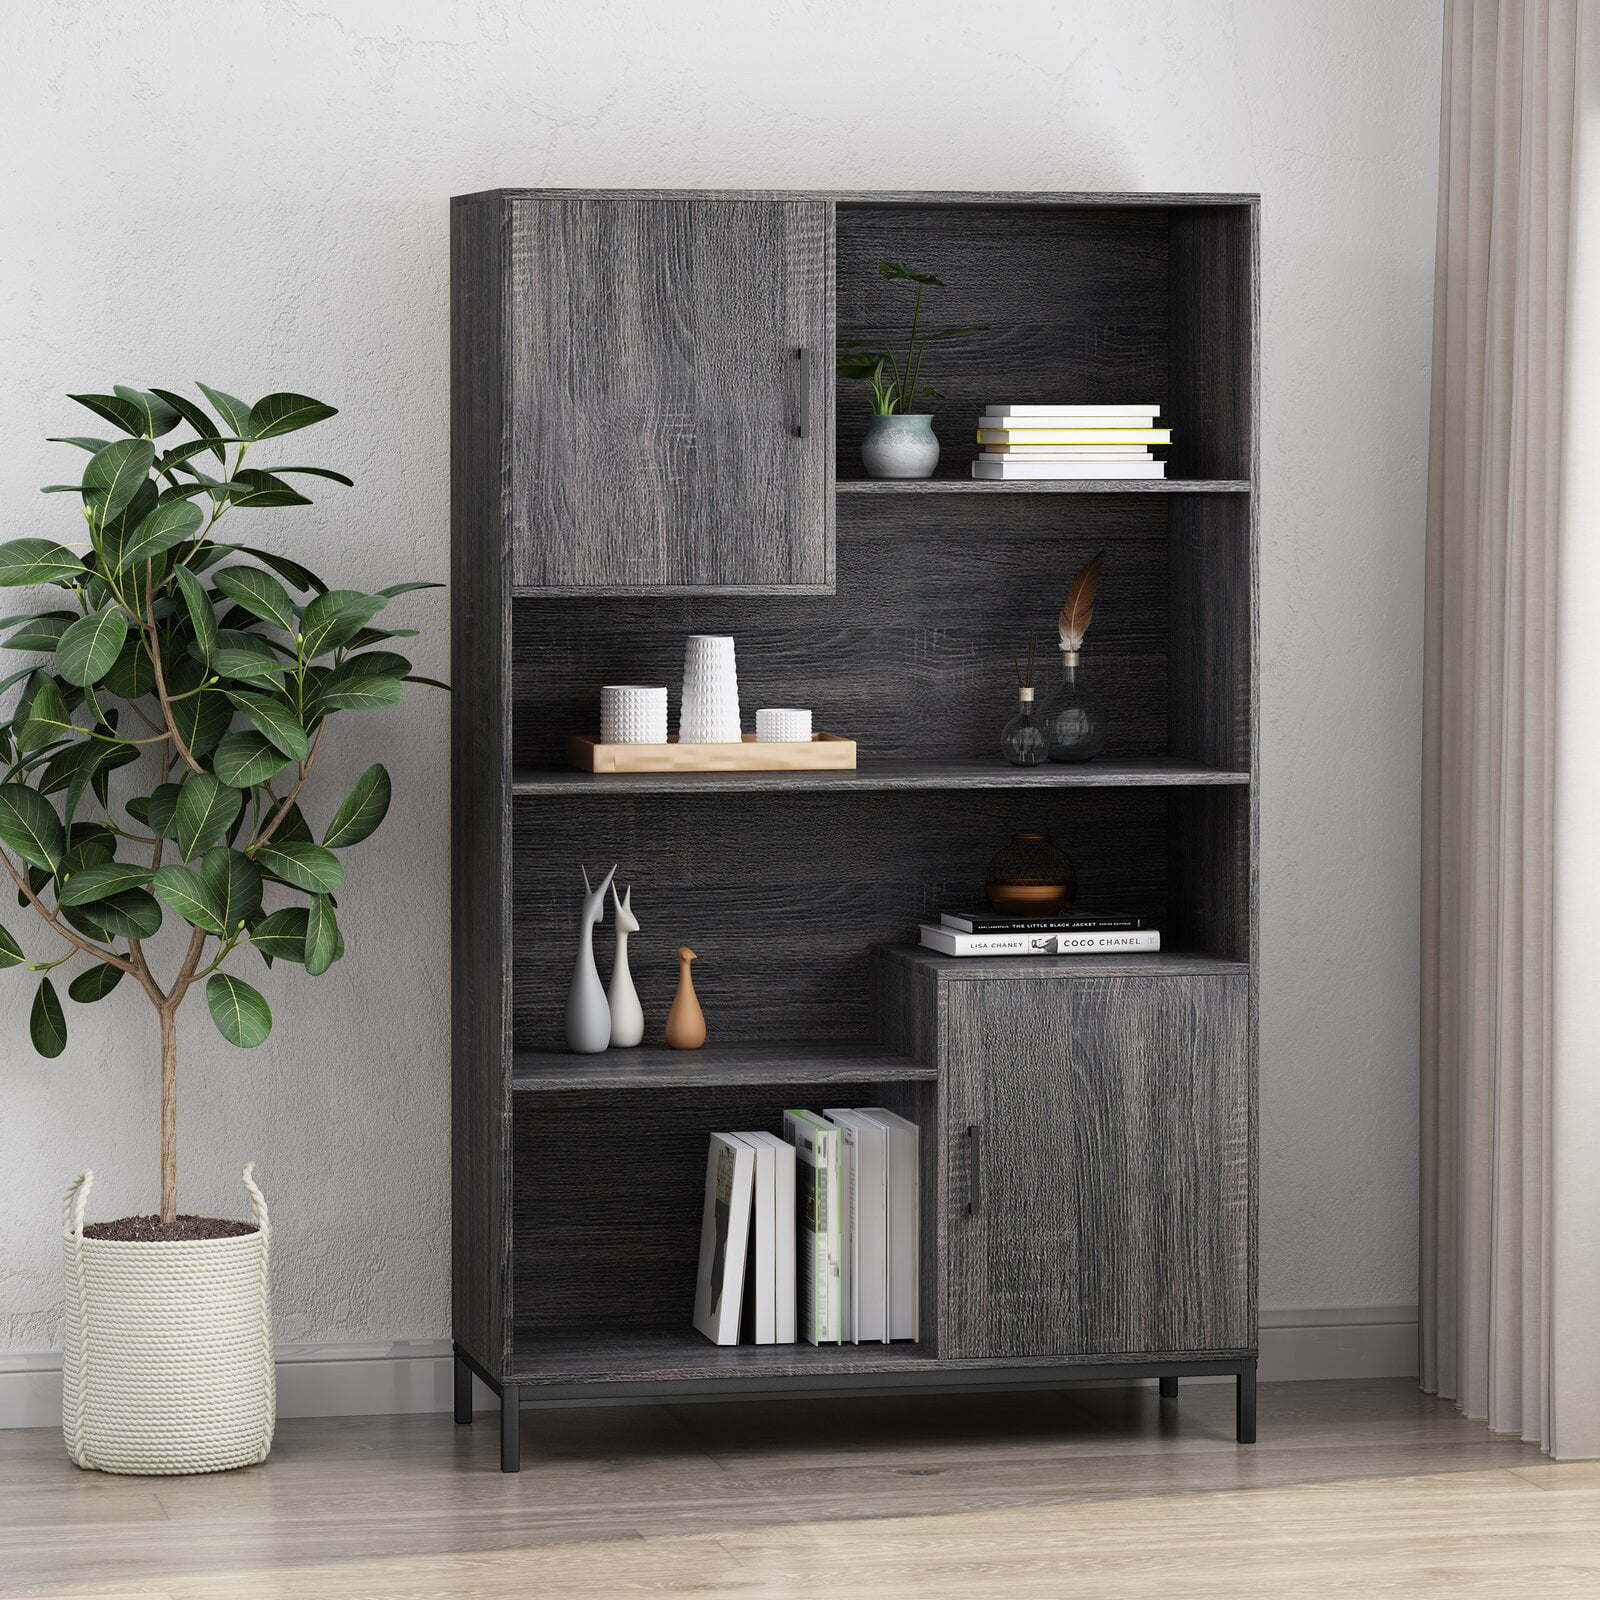 Anders Cube Unit Standard Bookcase, Anders White Cube Bookcase With Legs